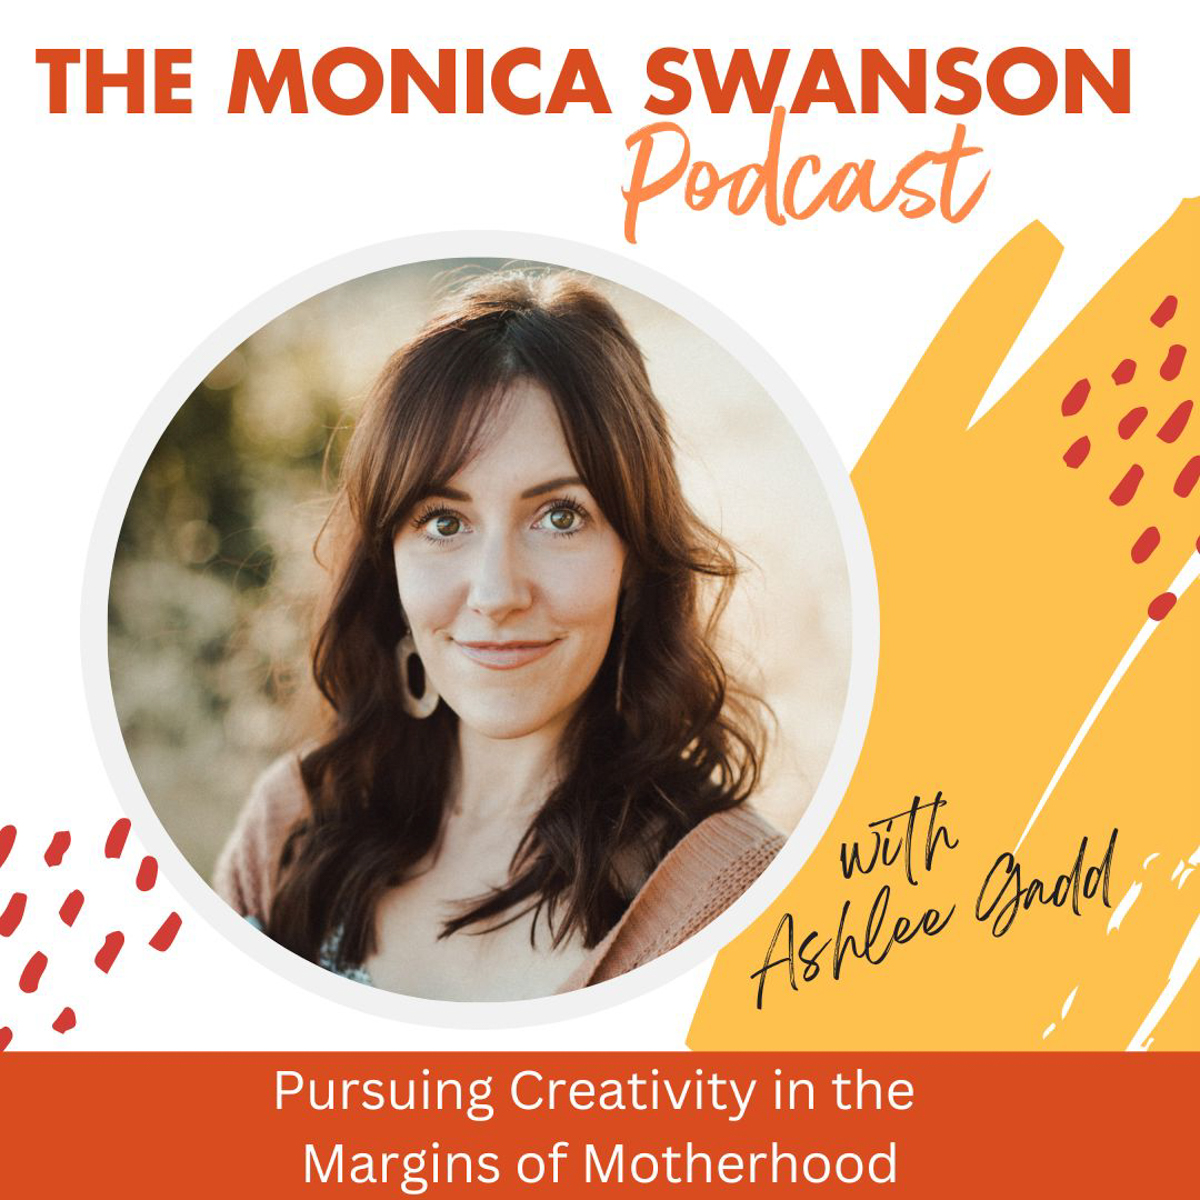 Pursuing Creativity in the Margins of Motherhood, with Ashlee Gadd